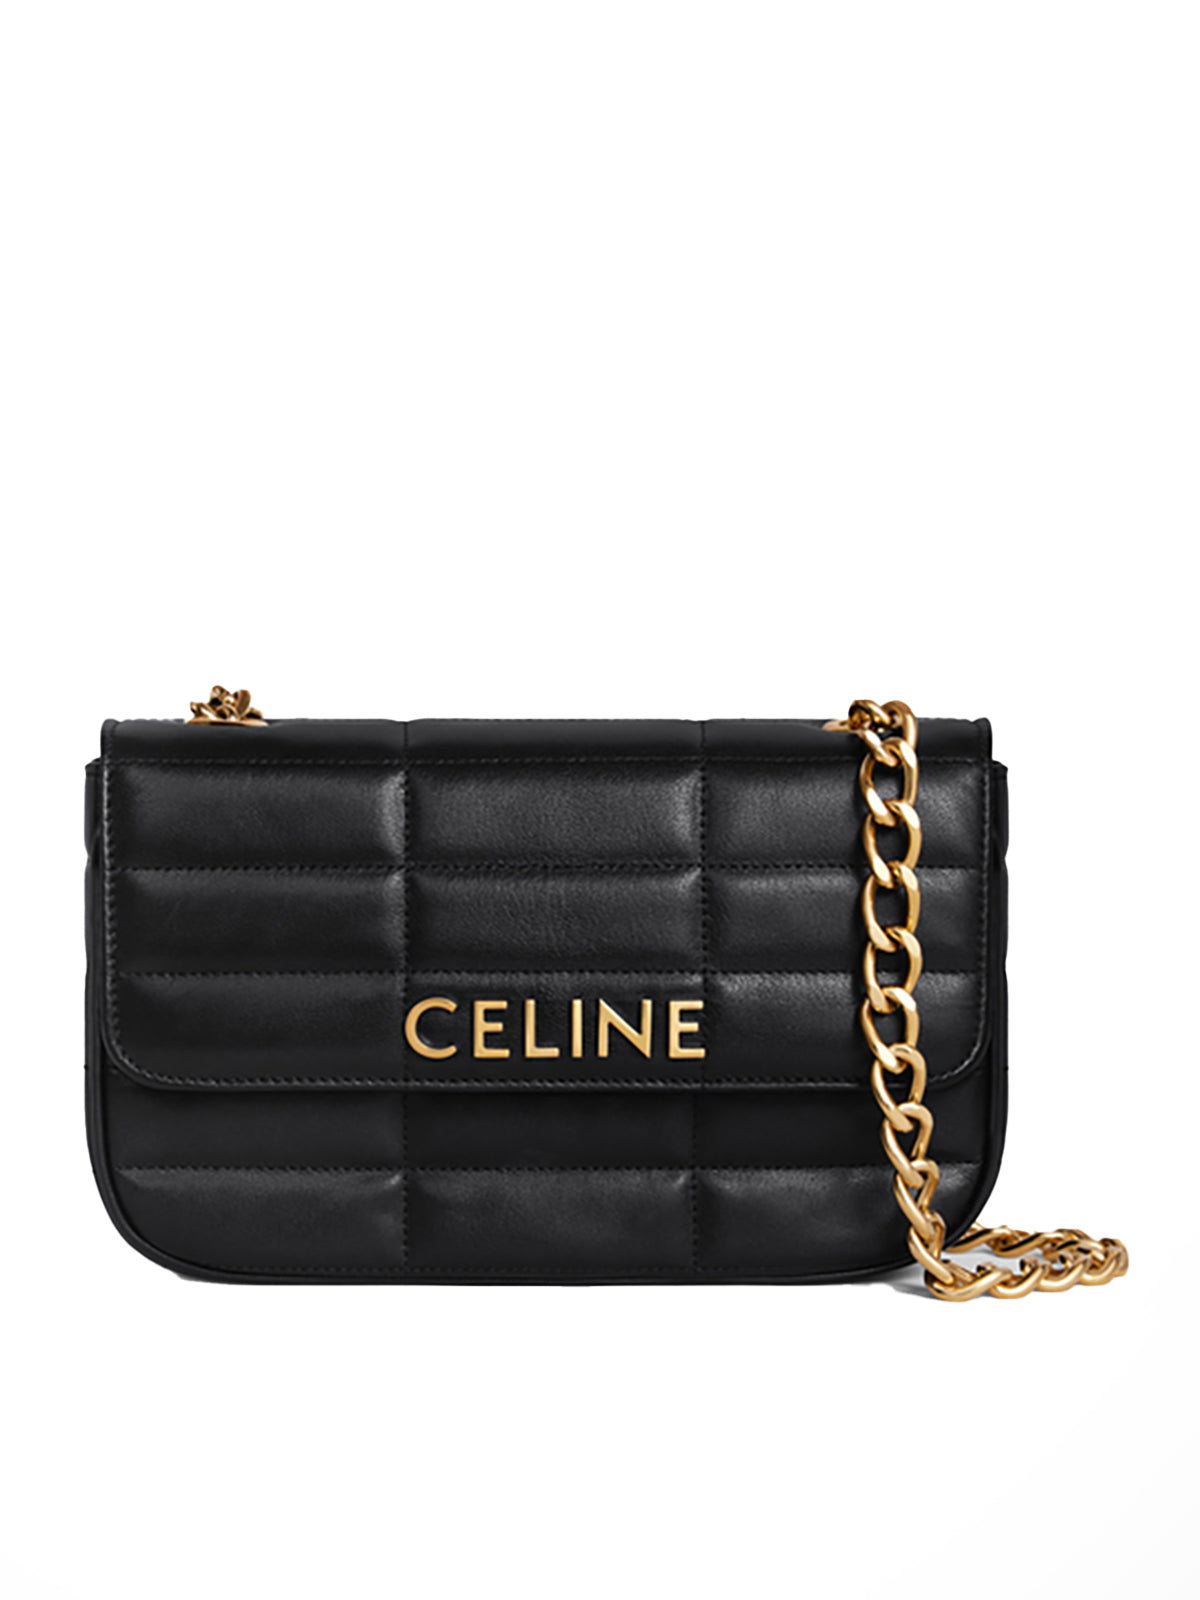 CELINE MONOCHROME QUILTED SHOULDER BAG WITH GOAT LEATHER CHAIN